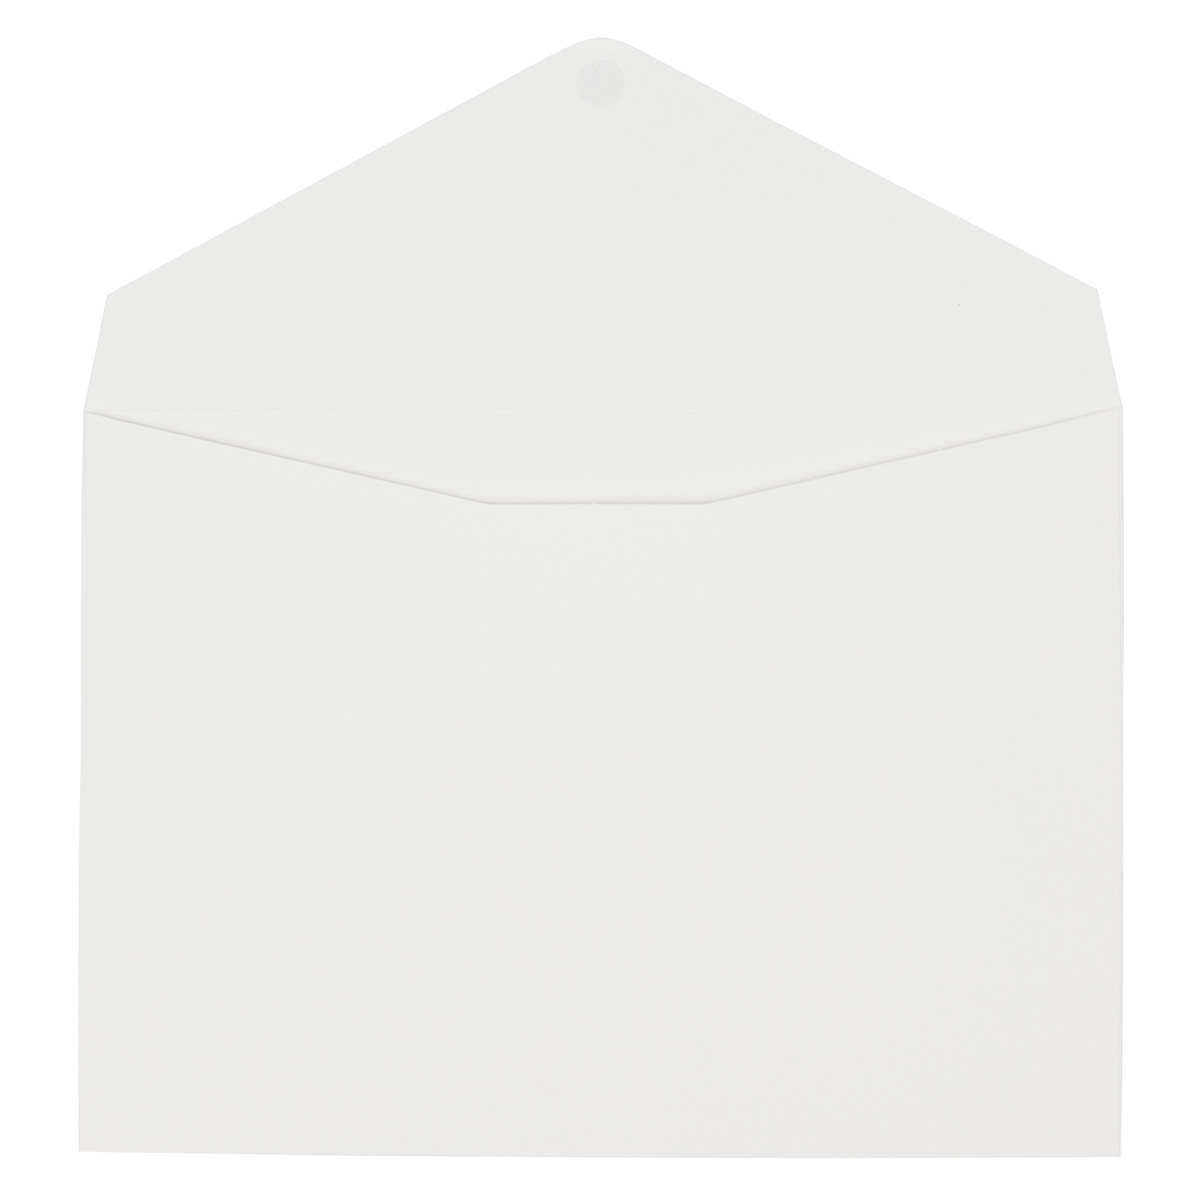 Paper gift envelopes with flap closure